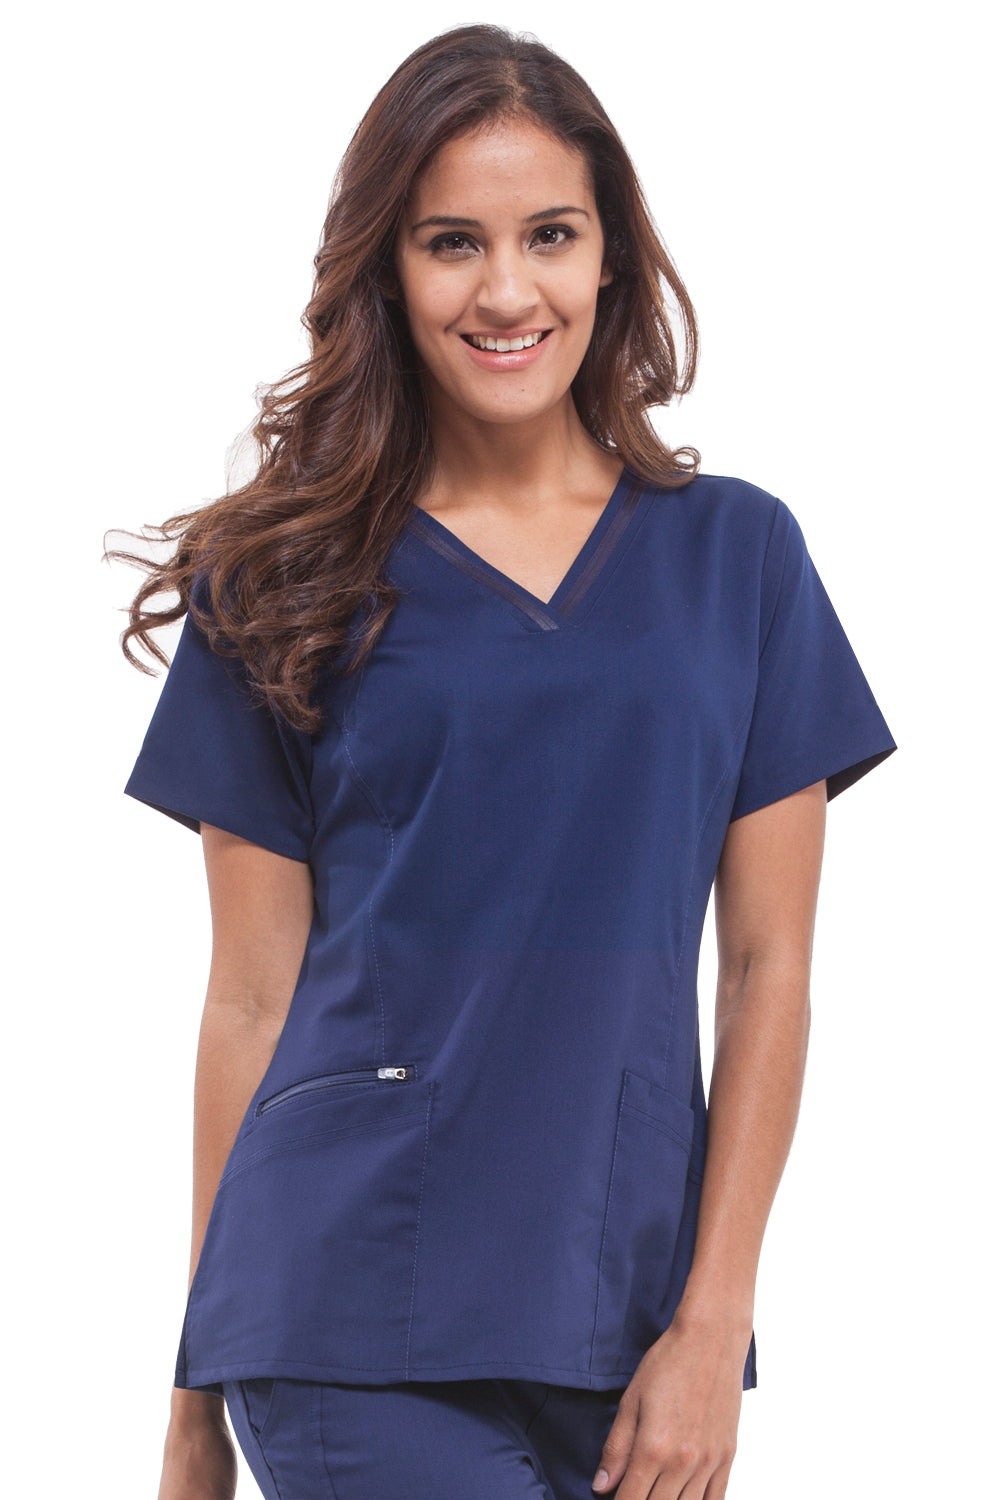 Healing Hands Scrub Top Purple Label Jasmin in Navy at Parker's Clothing and Shoes.